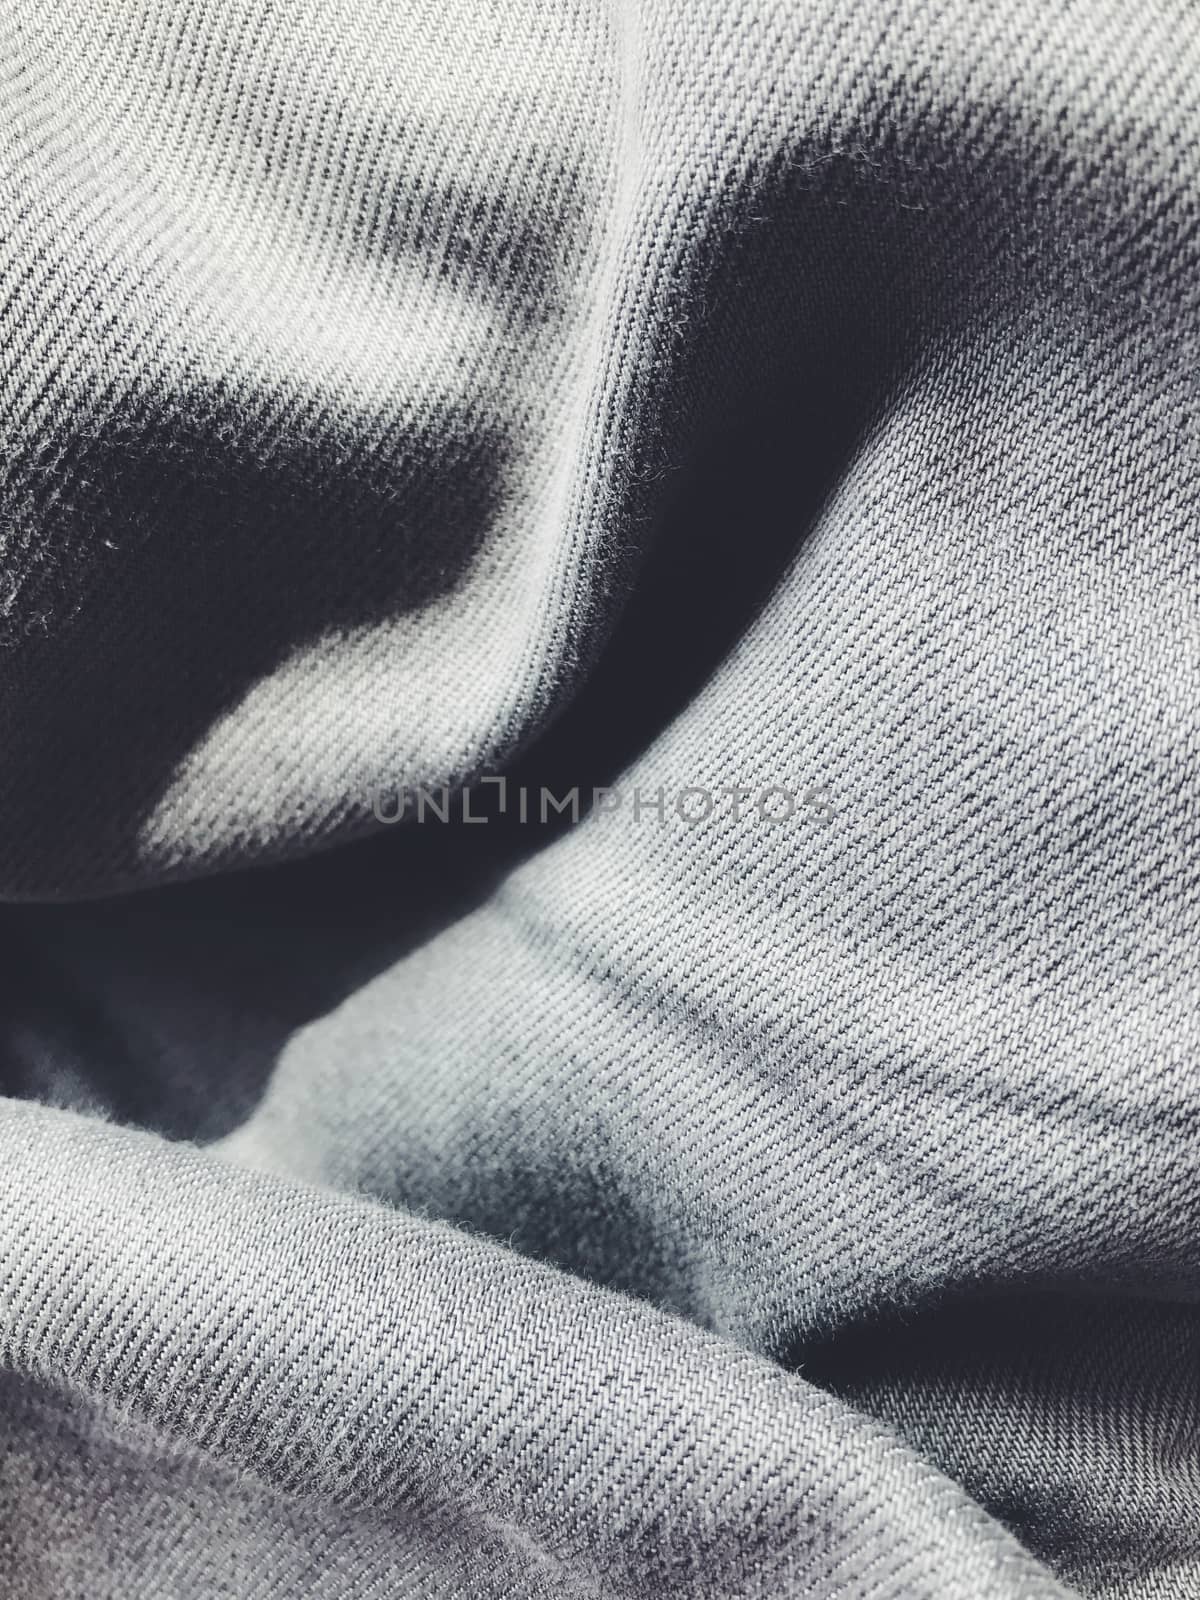 Textile fabric background. Сasual simple everyday clothers